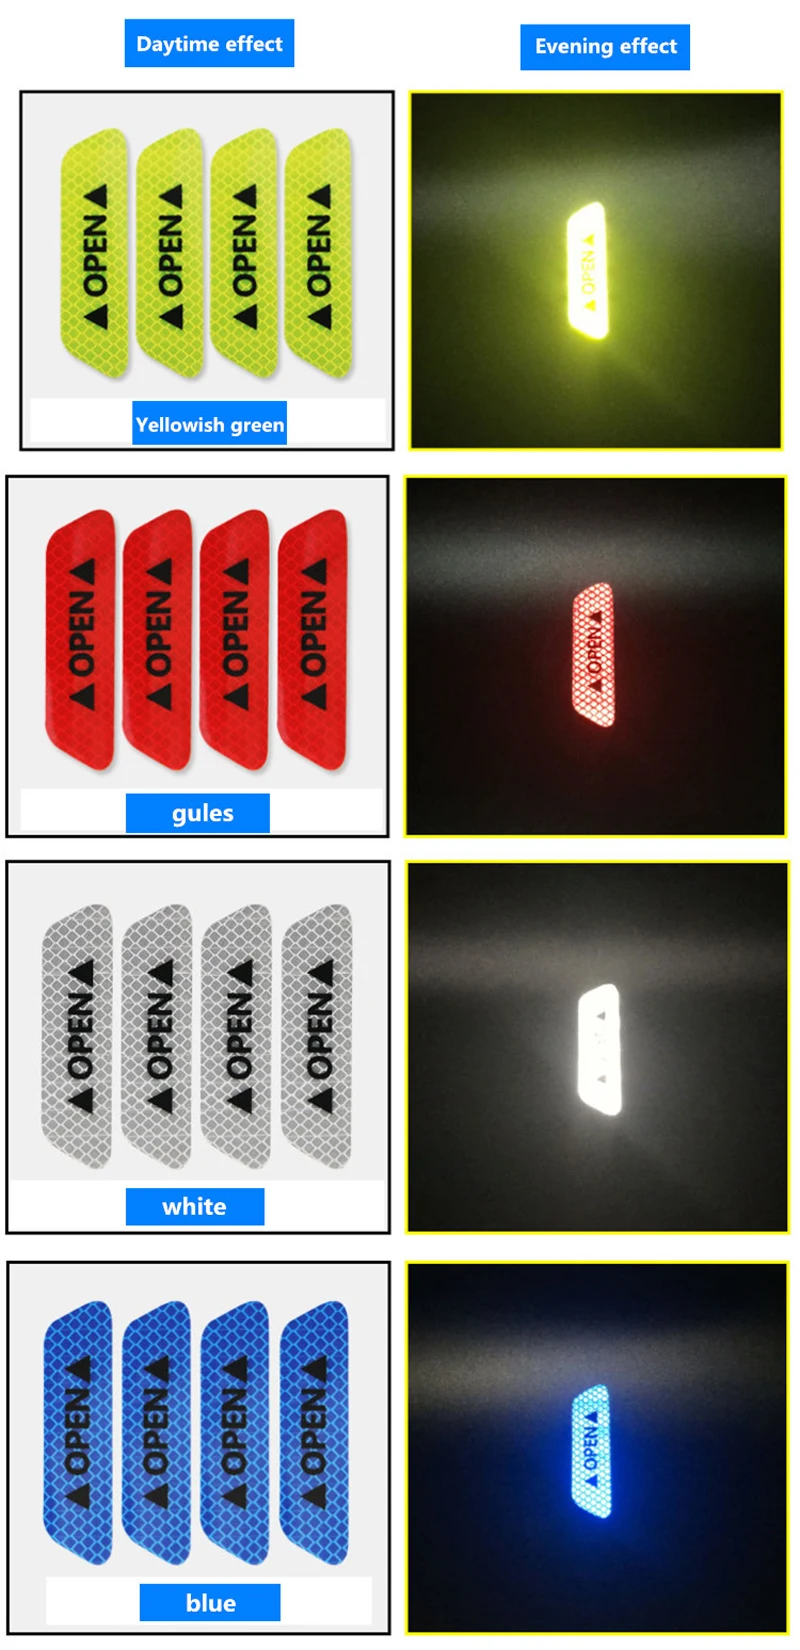 4Pcs/Set car door warning stickers Reflective security warning for BMW e46 e39 Audi a4 b6 a3 VW polo Lada granta accessories